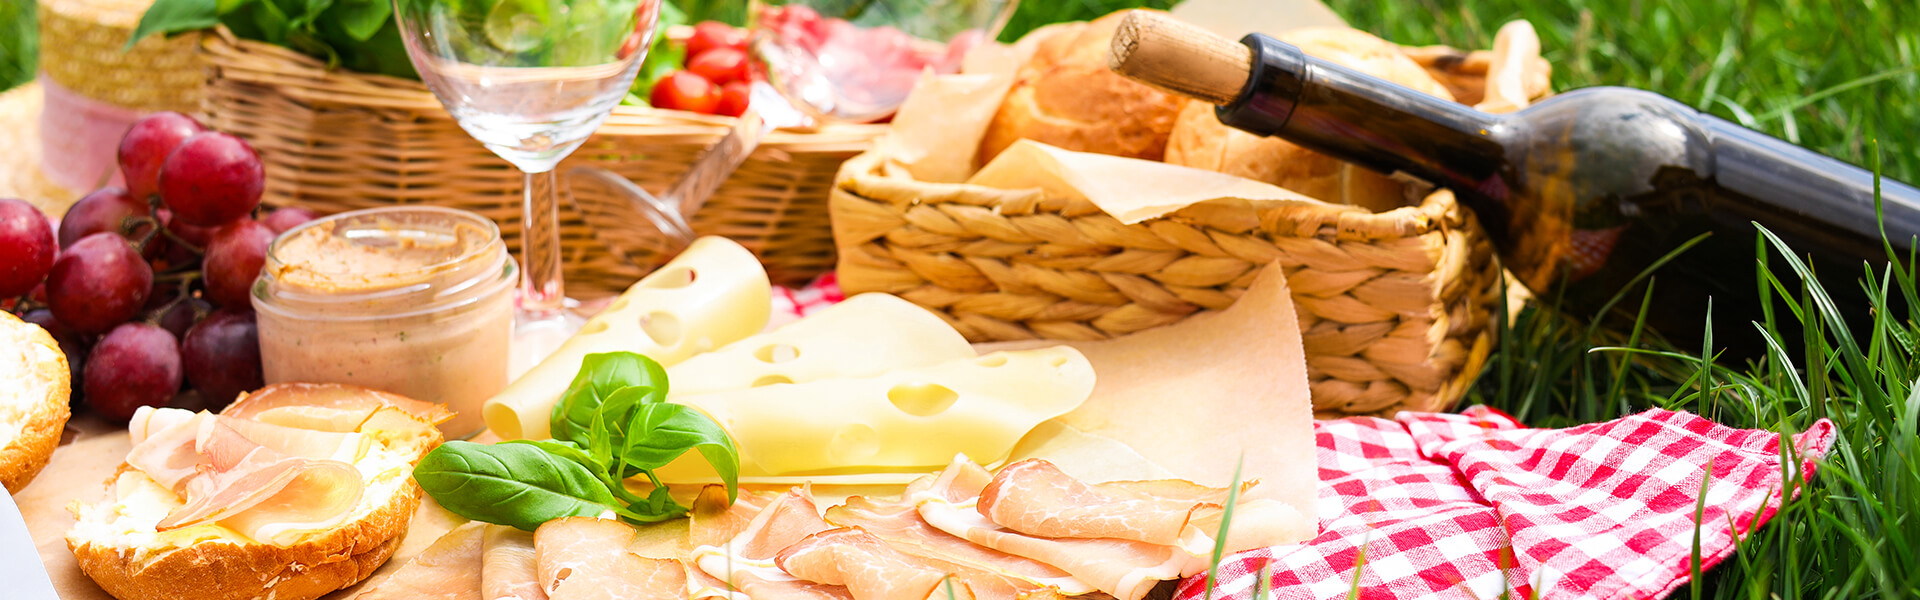 Mother's Day Lunch Idea - Picnic spread for 4 with cheese, deli meats and wine!